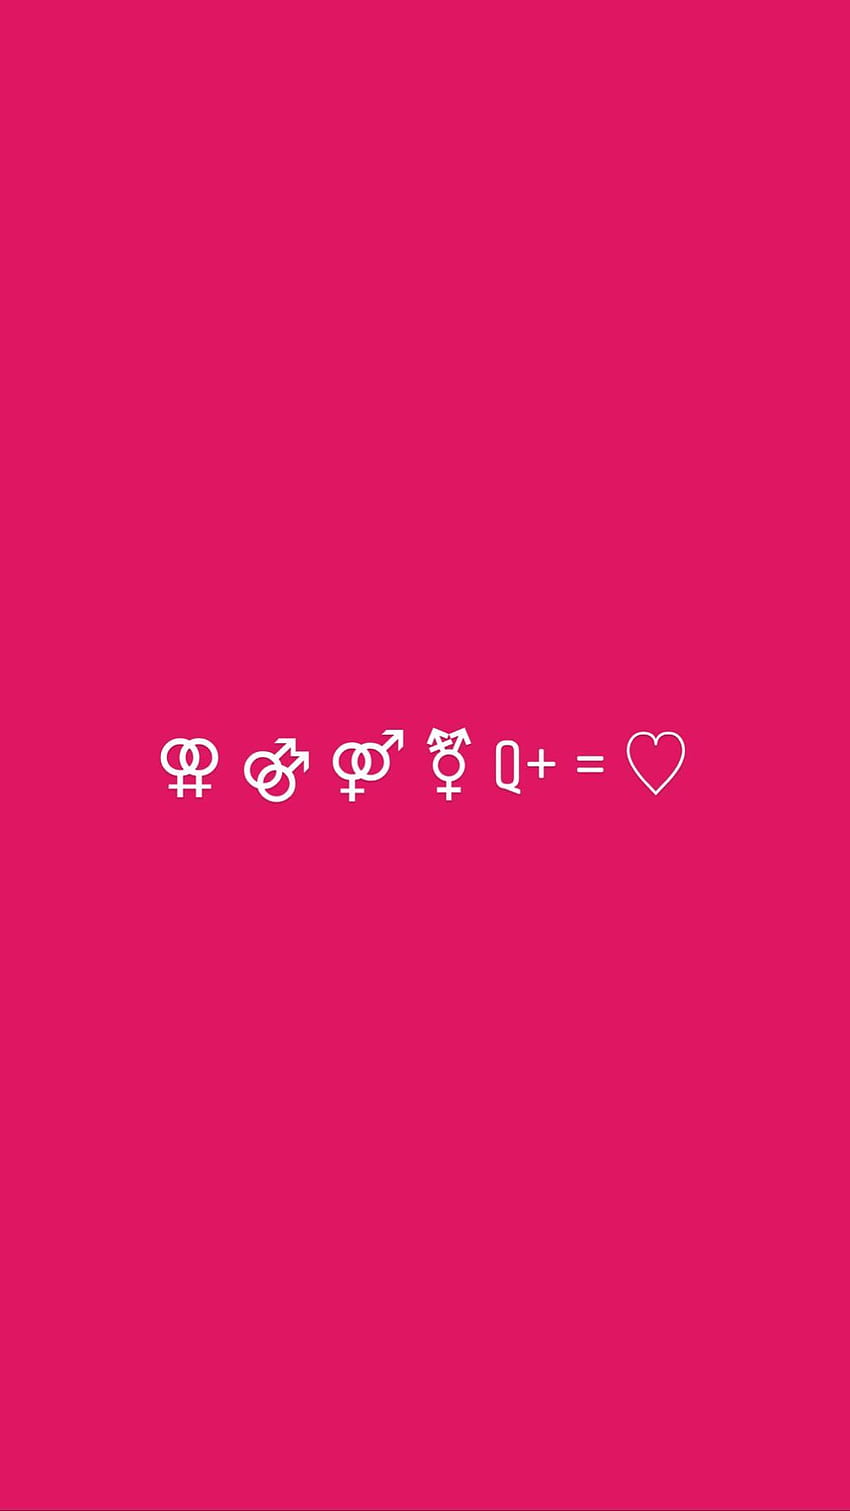 A pink background with a white graphic of a heart - Lesbian